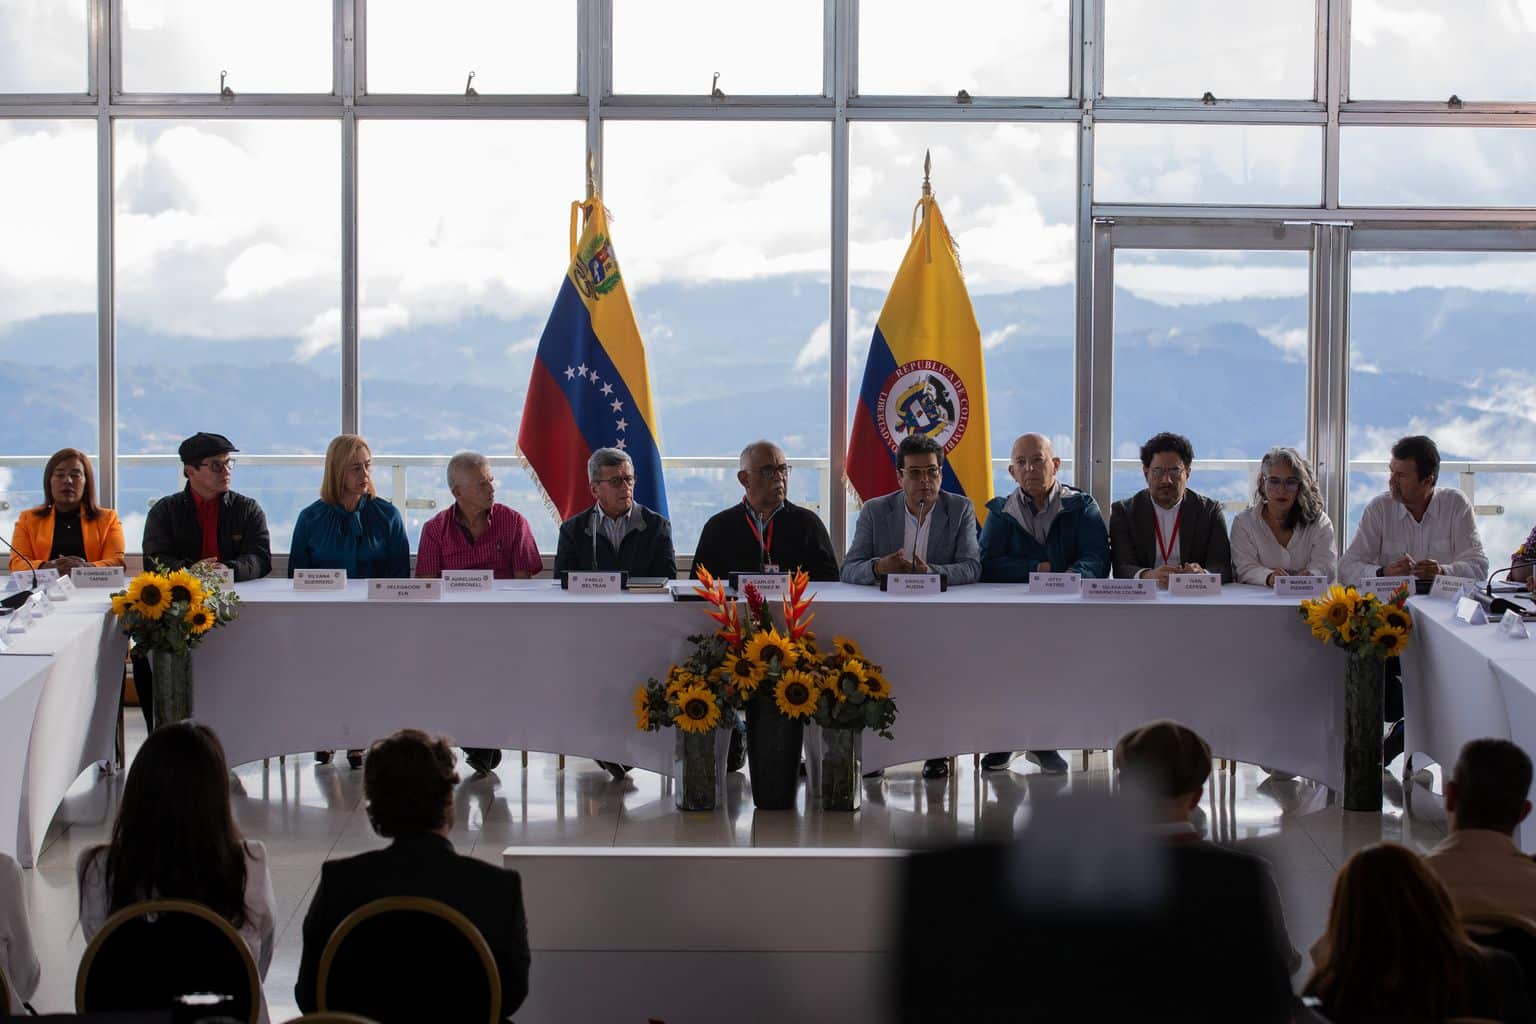 View of all delegates participating in the new round of peace talks between ELN and the Colombian government, launched in Caracas this Monday, November 21, 2022. Photo: EFE.